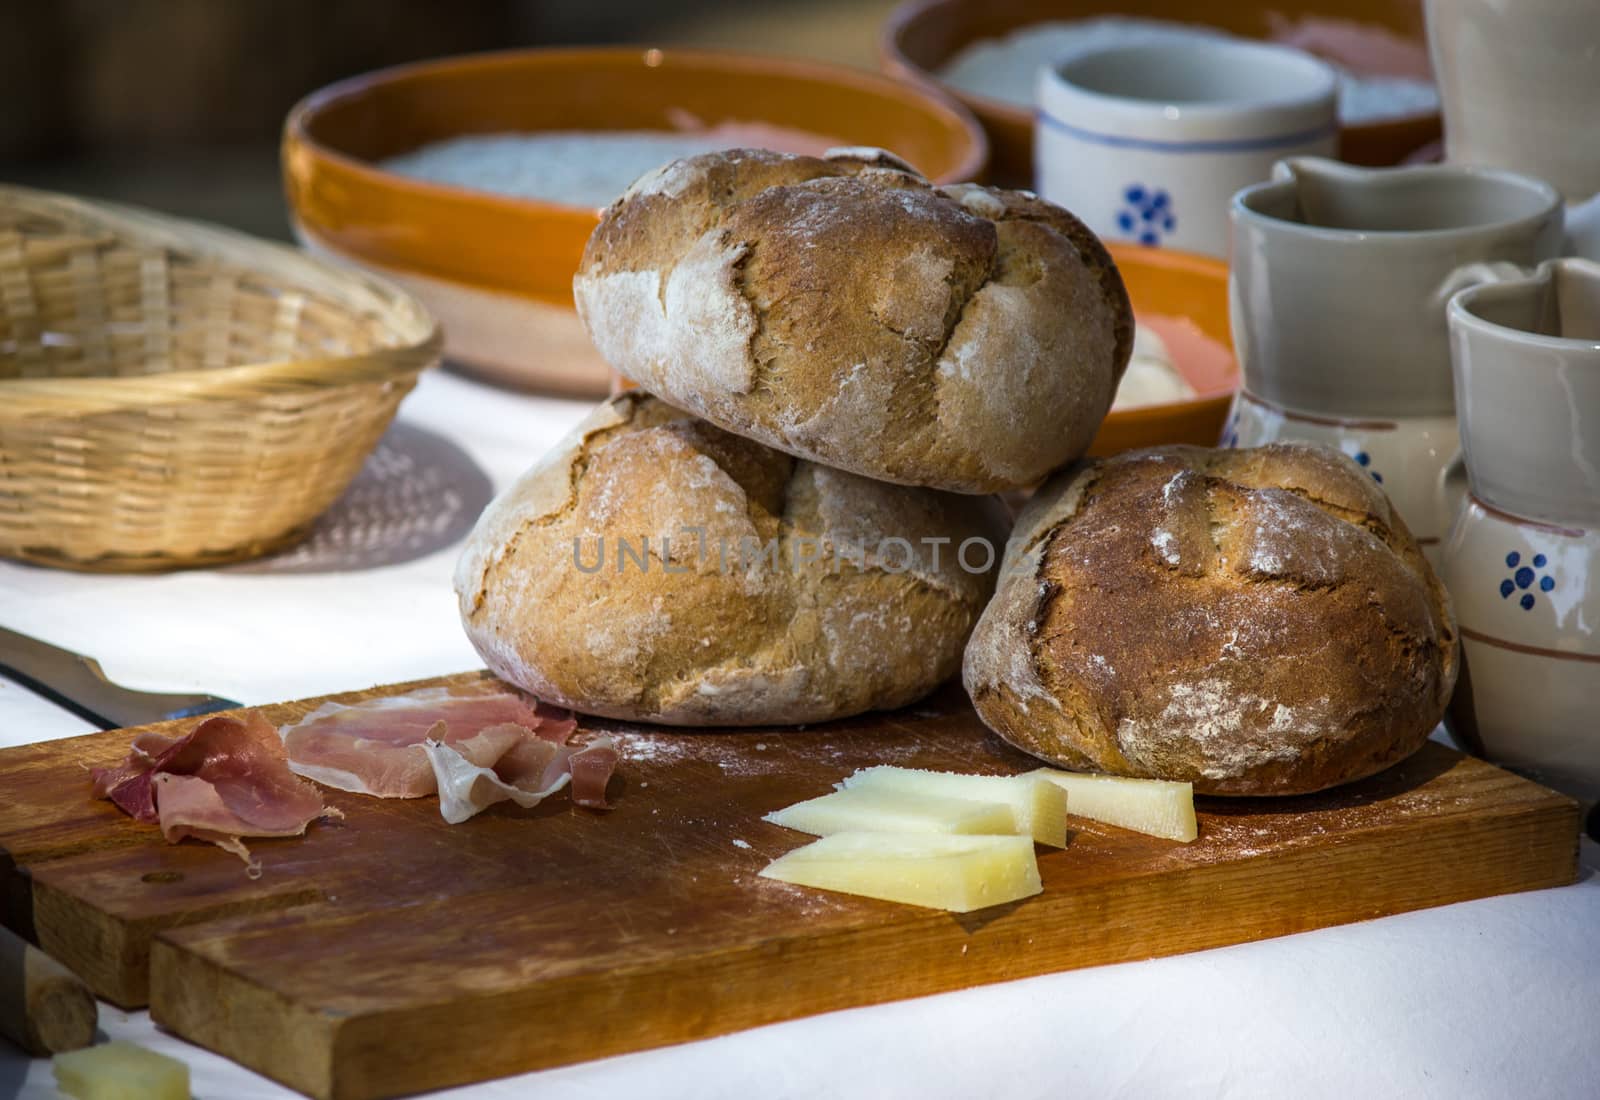 Freshly baked bread on cutting board with cheeses and cold cuts